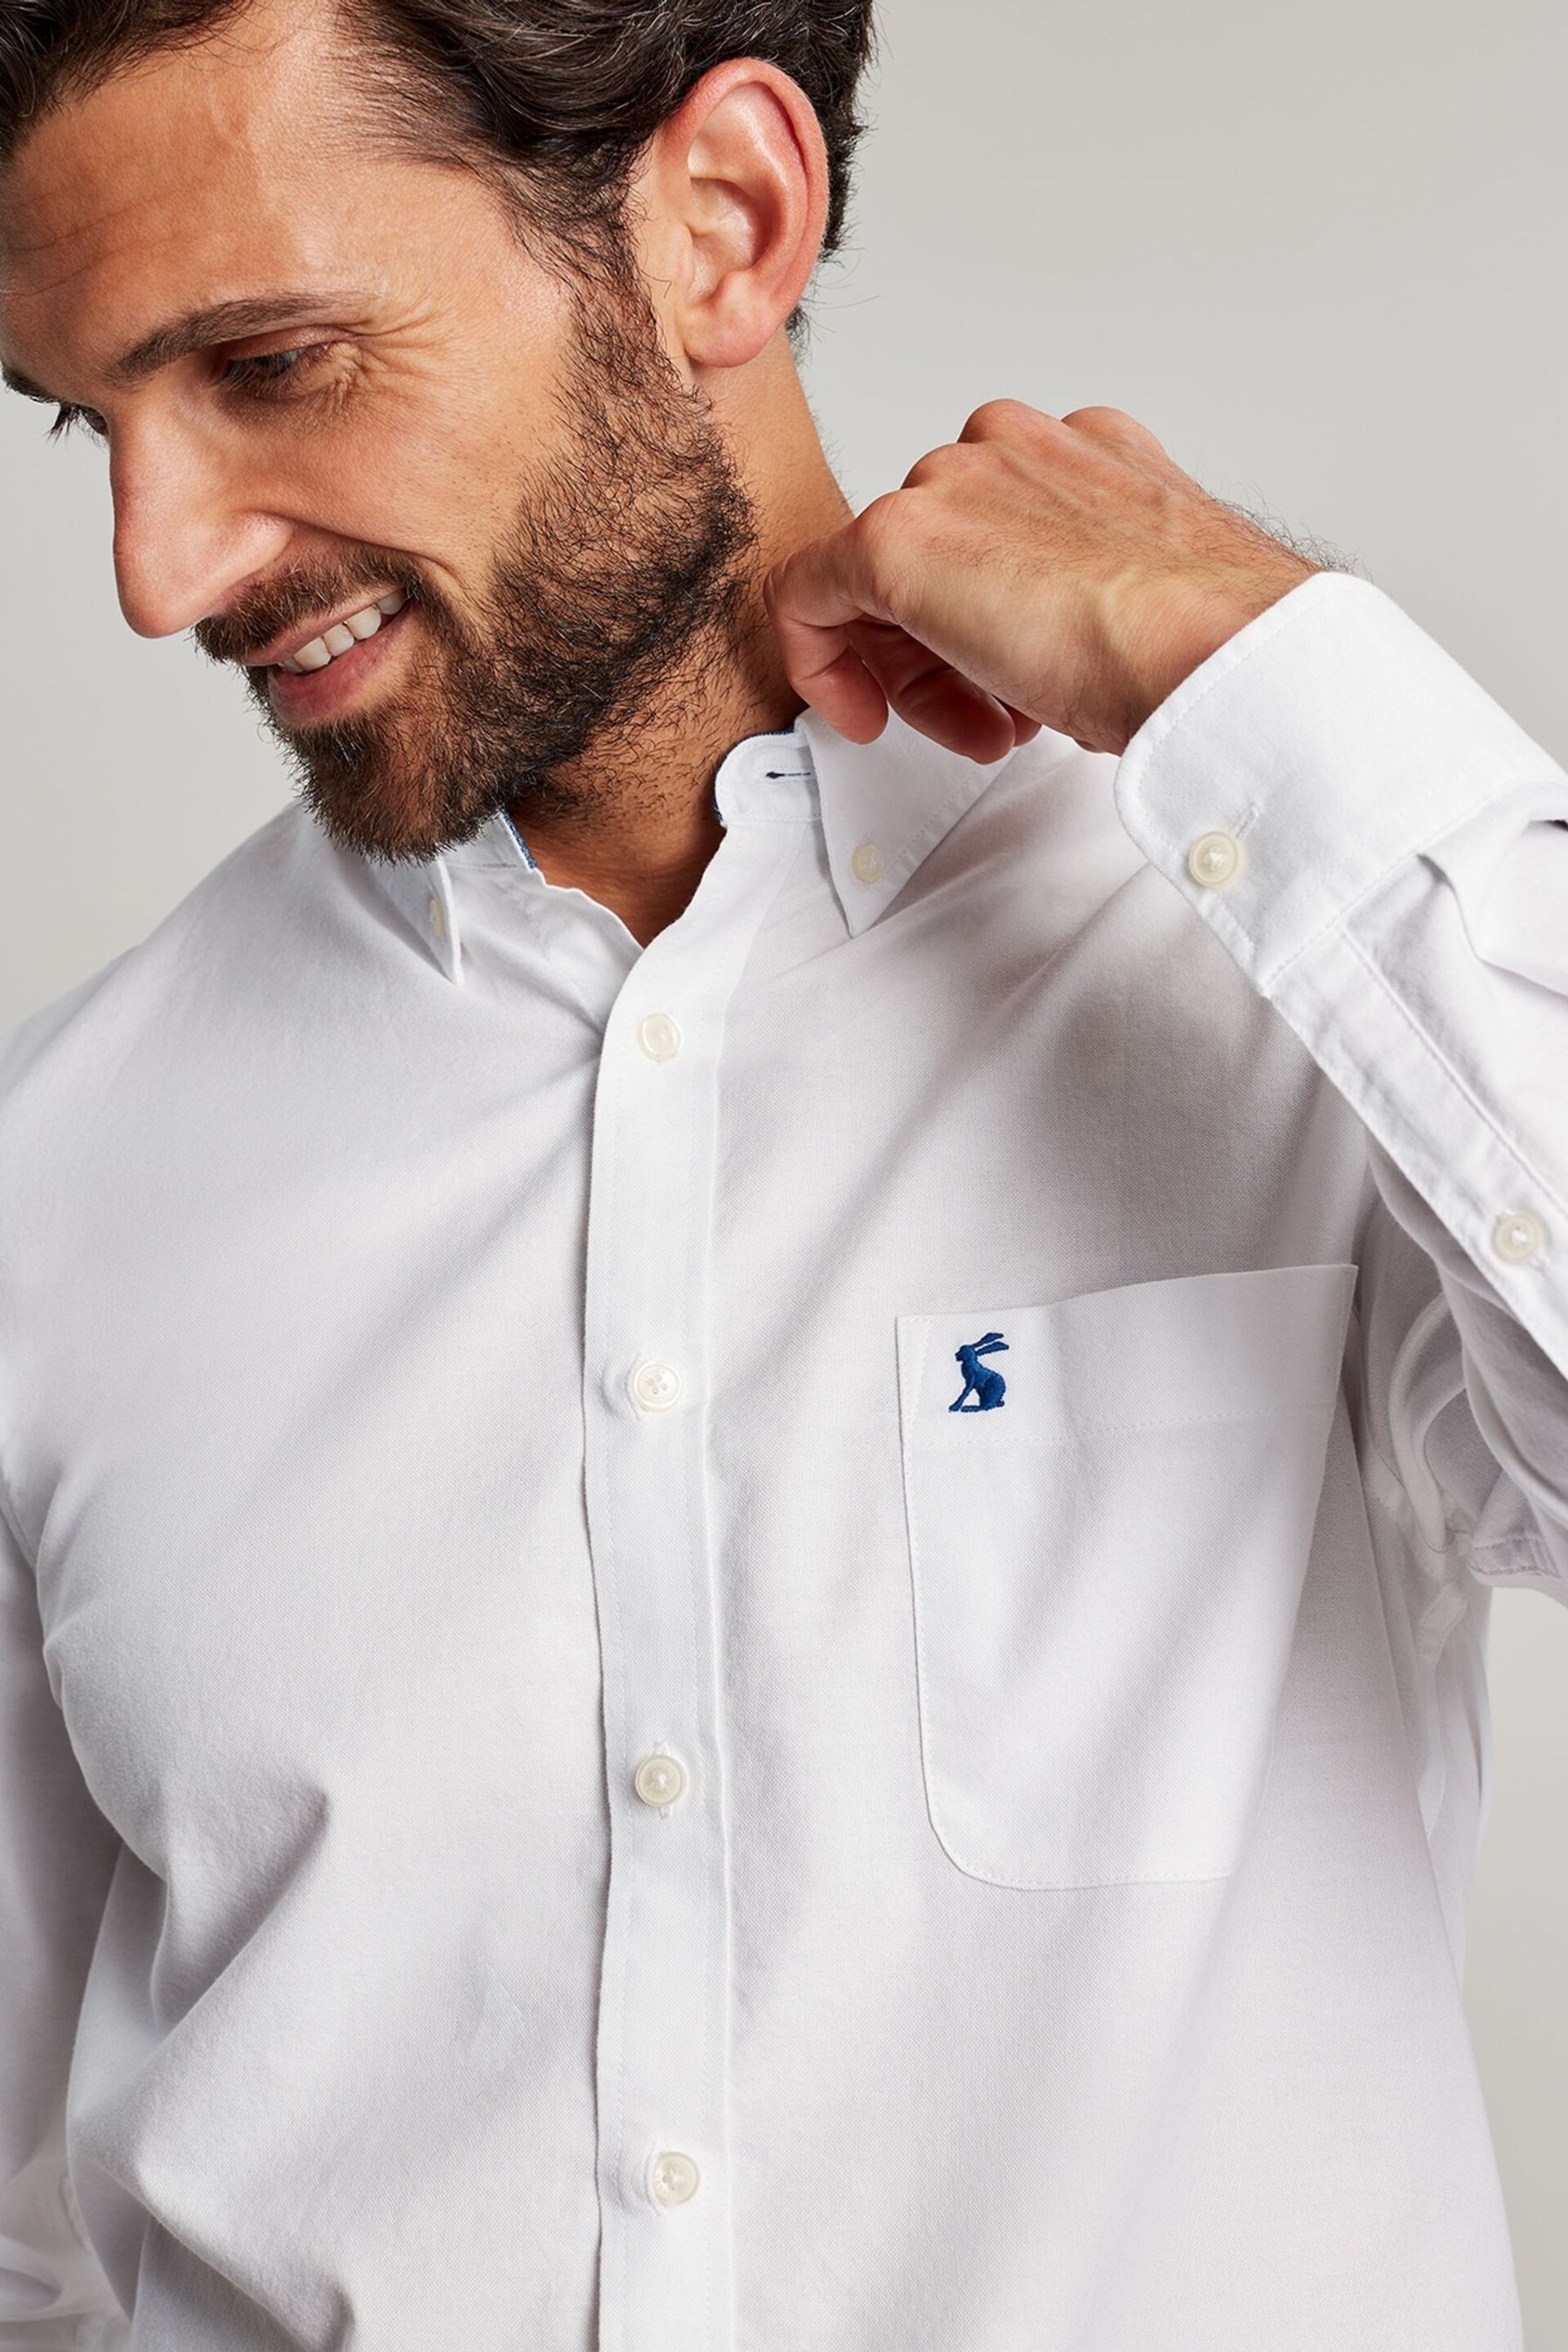 Joules White Classic Fit Cotton Oxford Shirt - Image 5 of 7